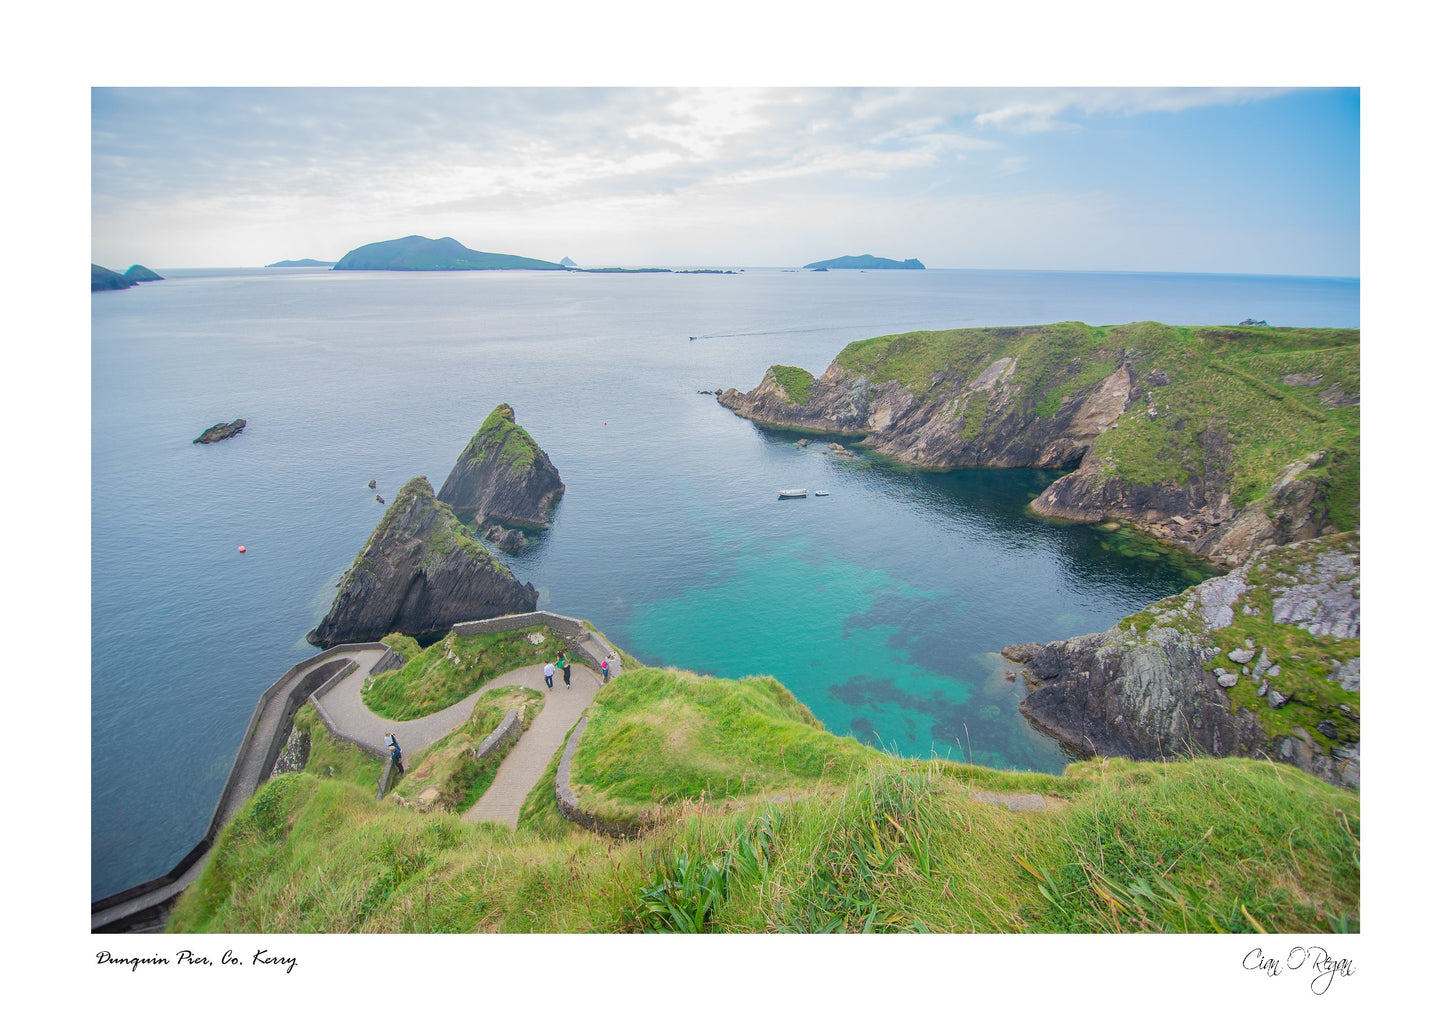 Dunquin Pier and the Blasket Islands, County Kerry